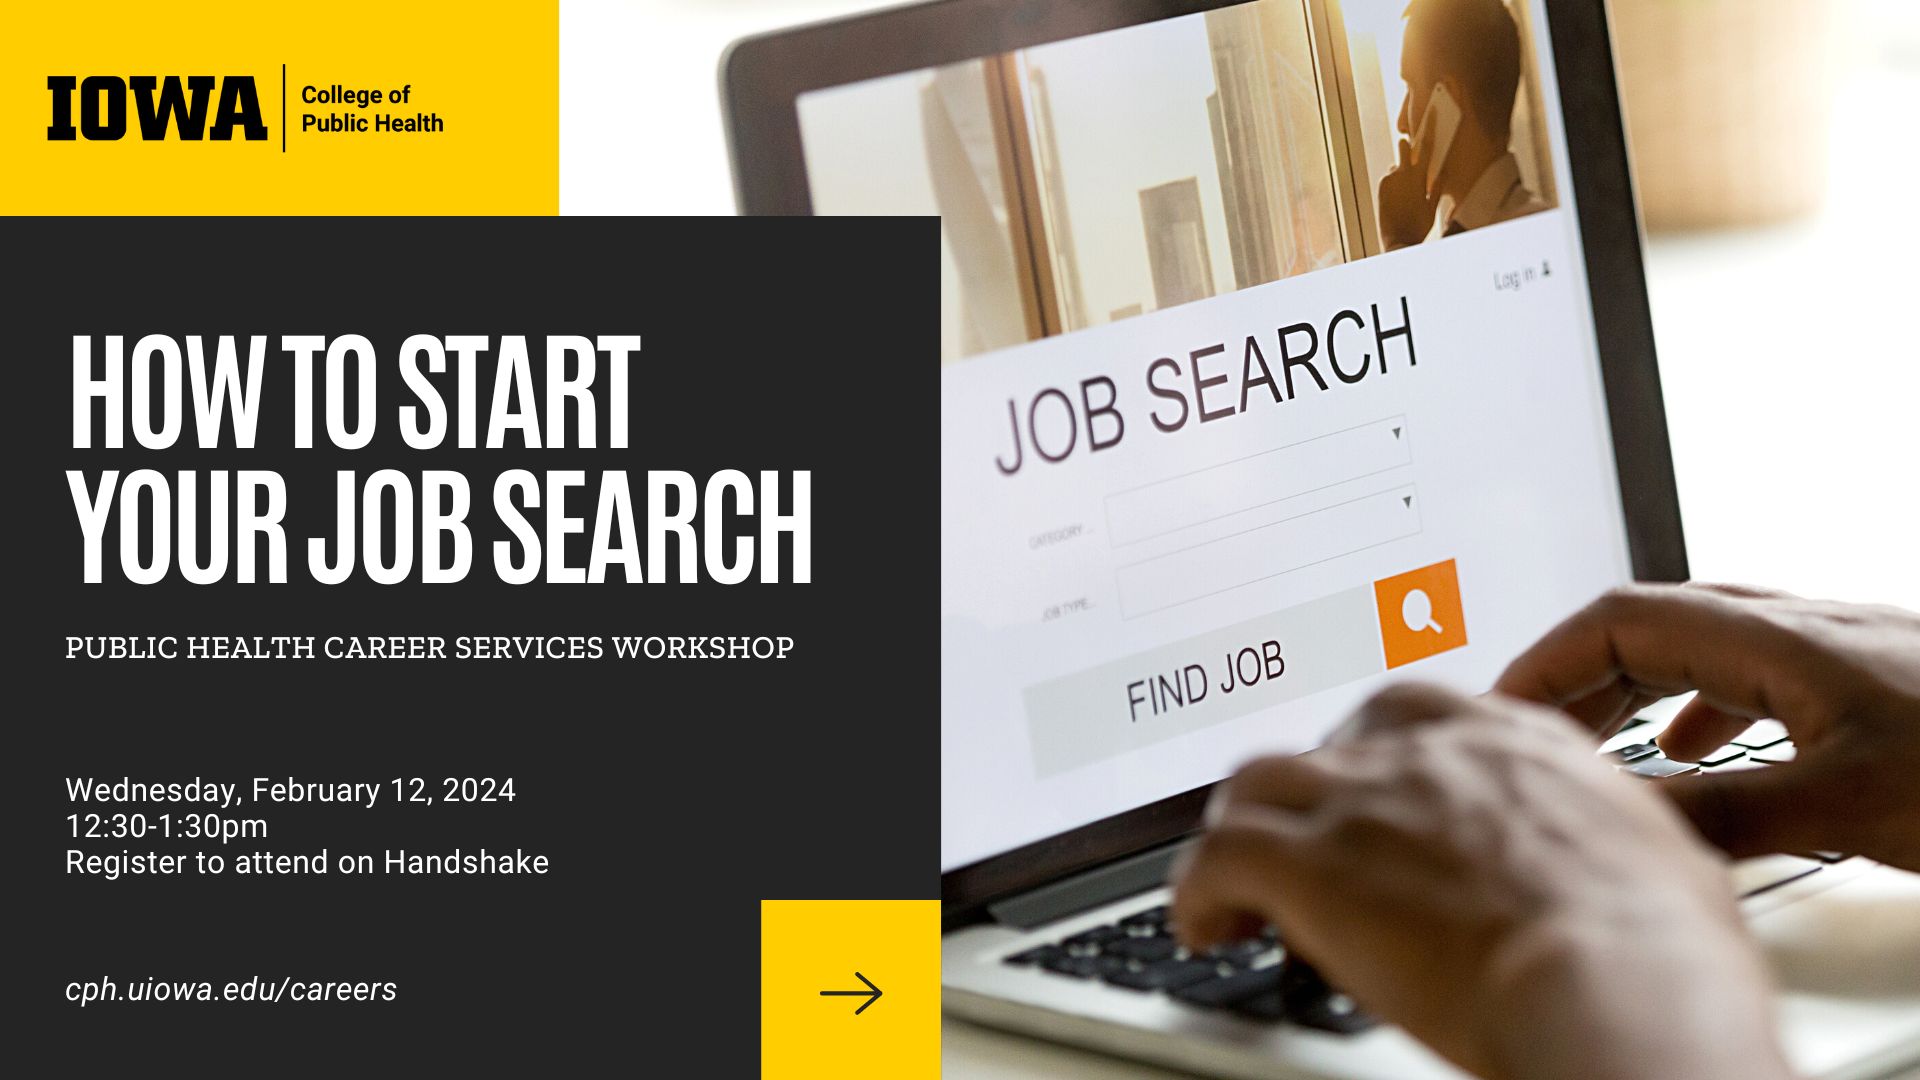 How to Start Your Job Search 101, February 12, 2024 at 12:30pm